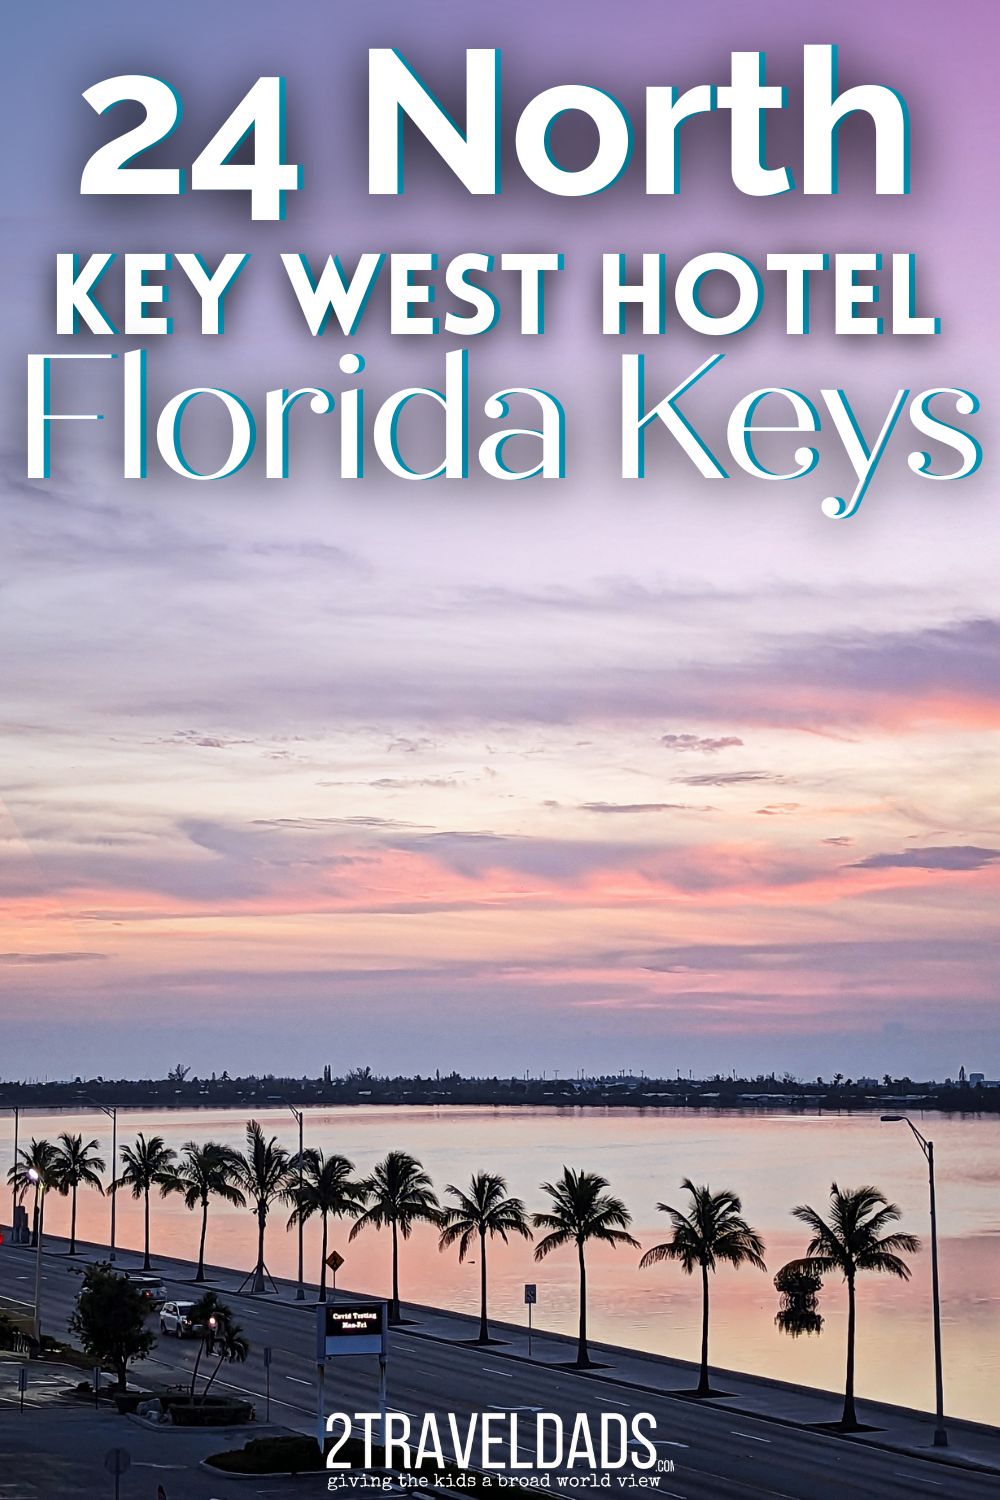 The 24 North Hotel in Key West is a surprising pick because of its location, but it's perfect for a budget family vacation. With a wonderful pool and recreation area, free shuttle to downtown Key West and affordable suite options, it's an ideal choice.